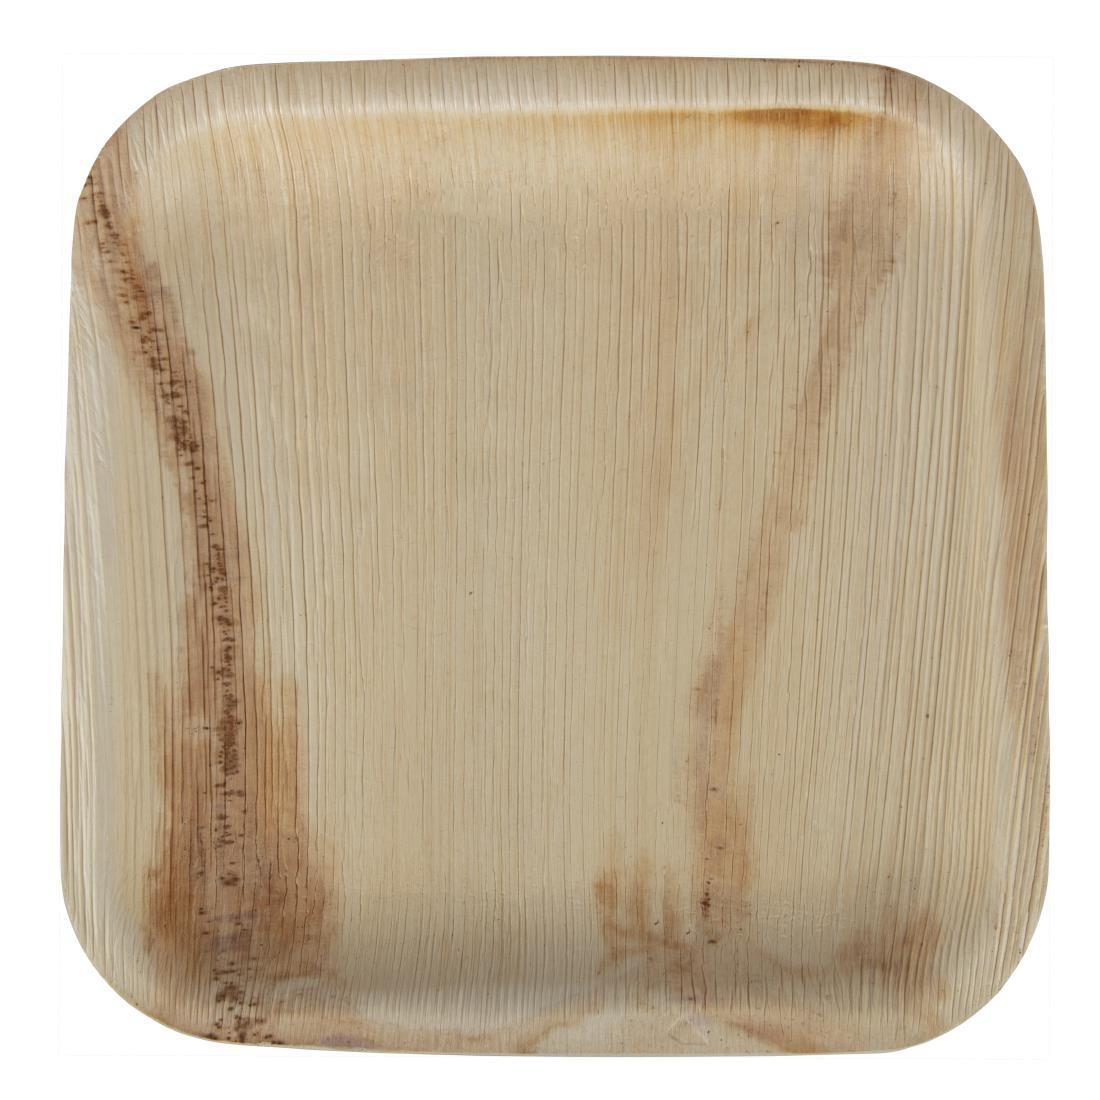 Fiesta Compostable Palm Leaf Plates Square 200mm (Pack of 100) - DK376  - 1